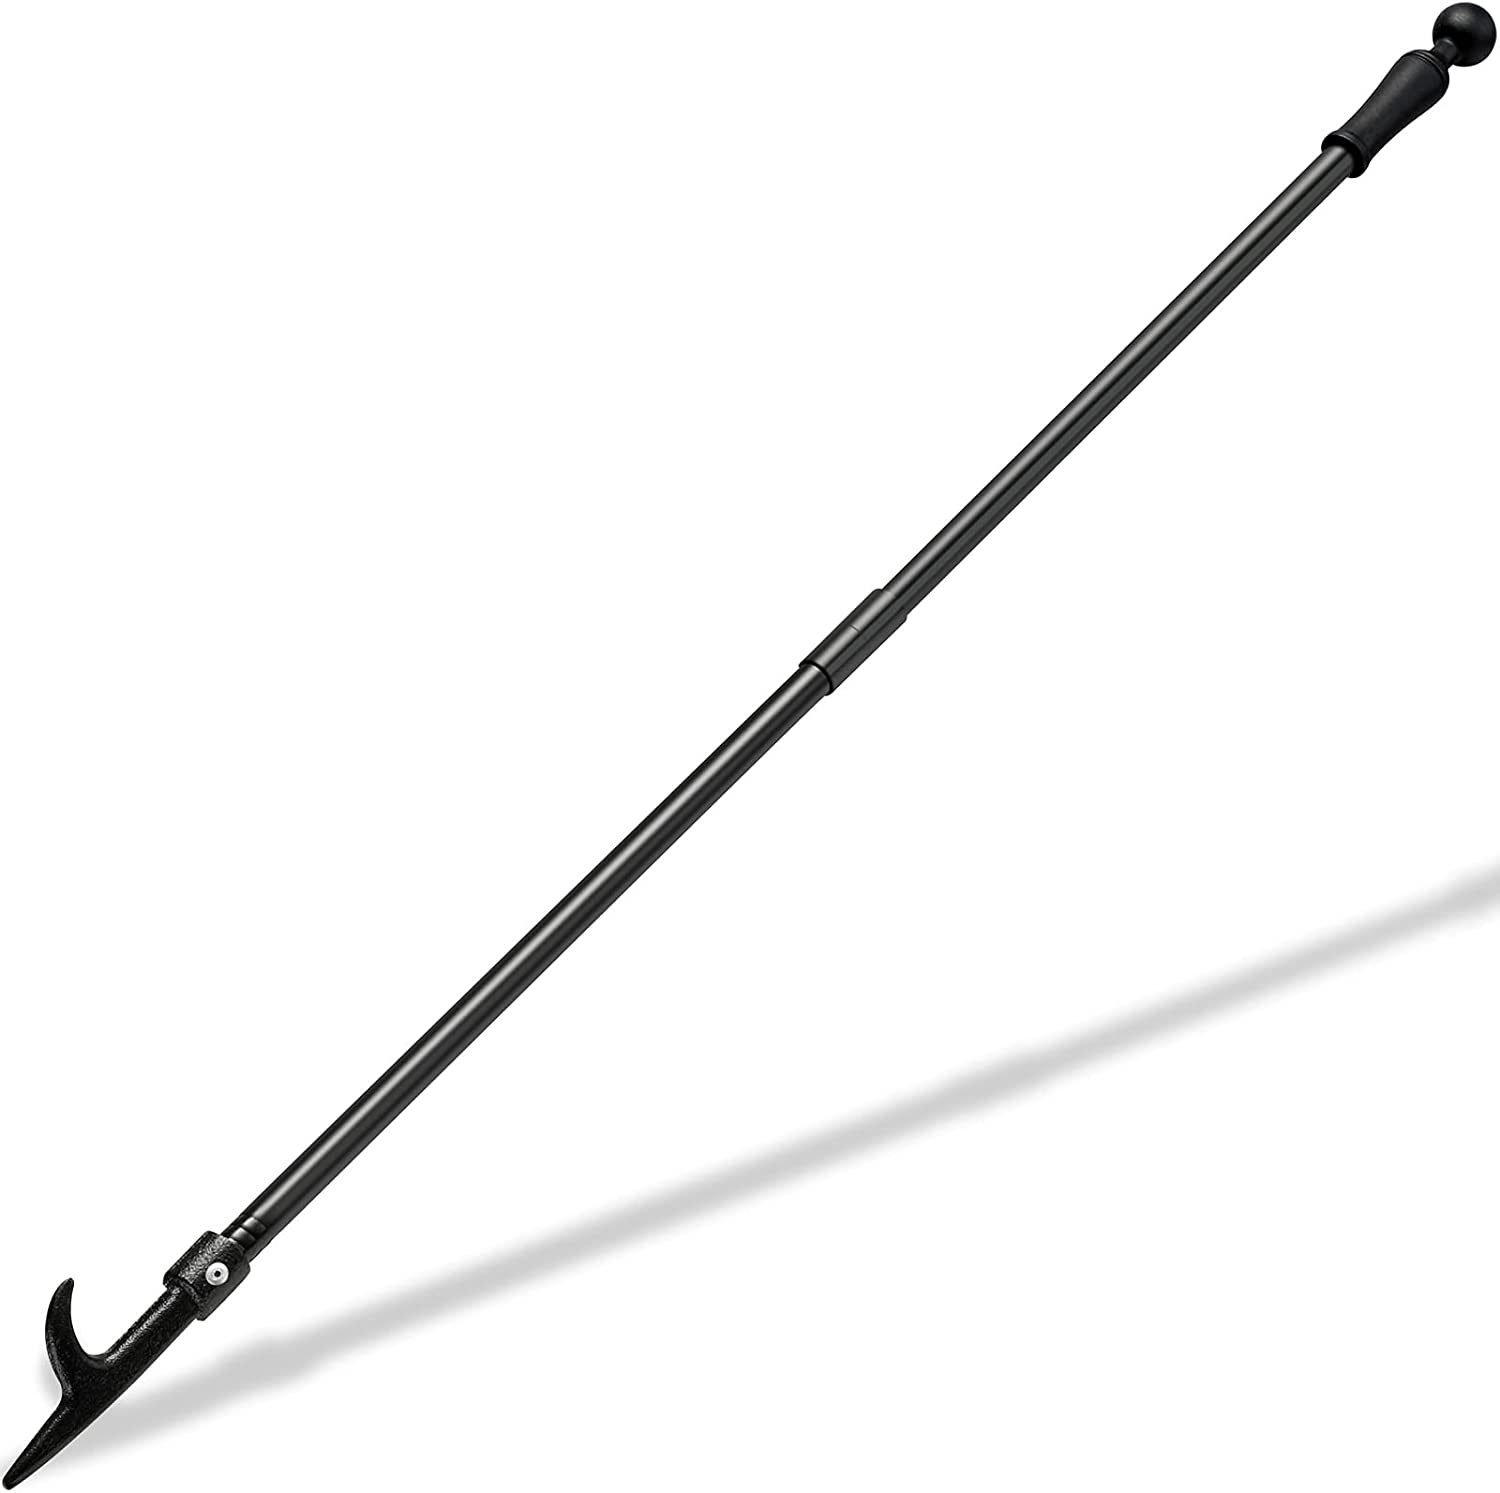 BsBsBest Fire Poker for Fire Pit, 46 Inch Extra Long Portable Campfire Poker for Fireplace, Camping, Wood Stove, Outdoor and Indoor Use, Rust Resistant Stainless Steel Black Finish